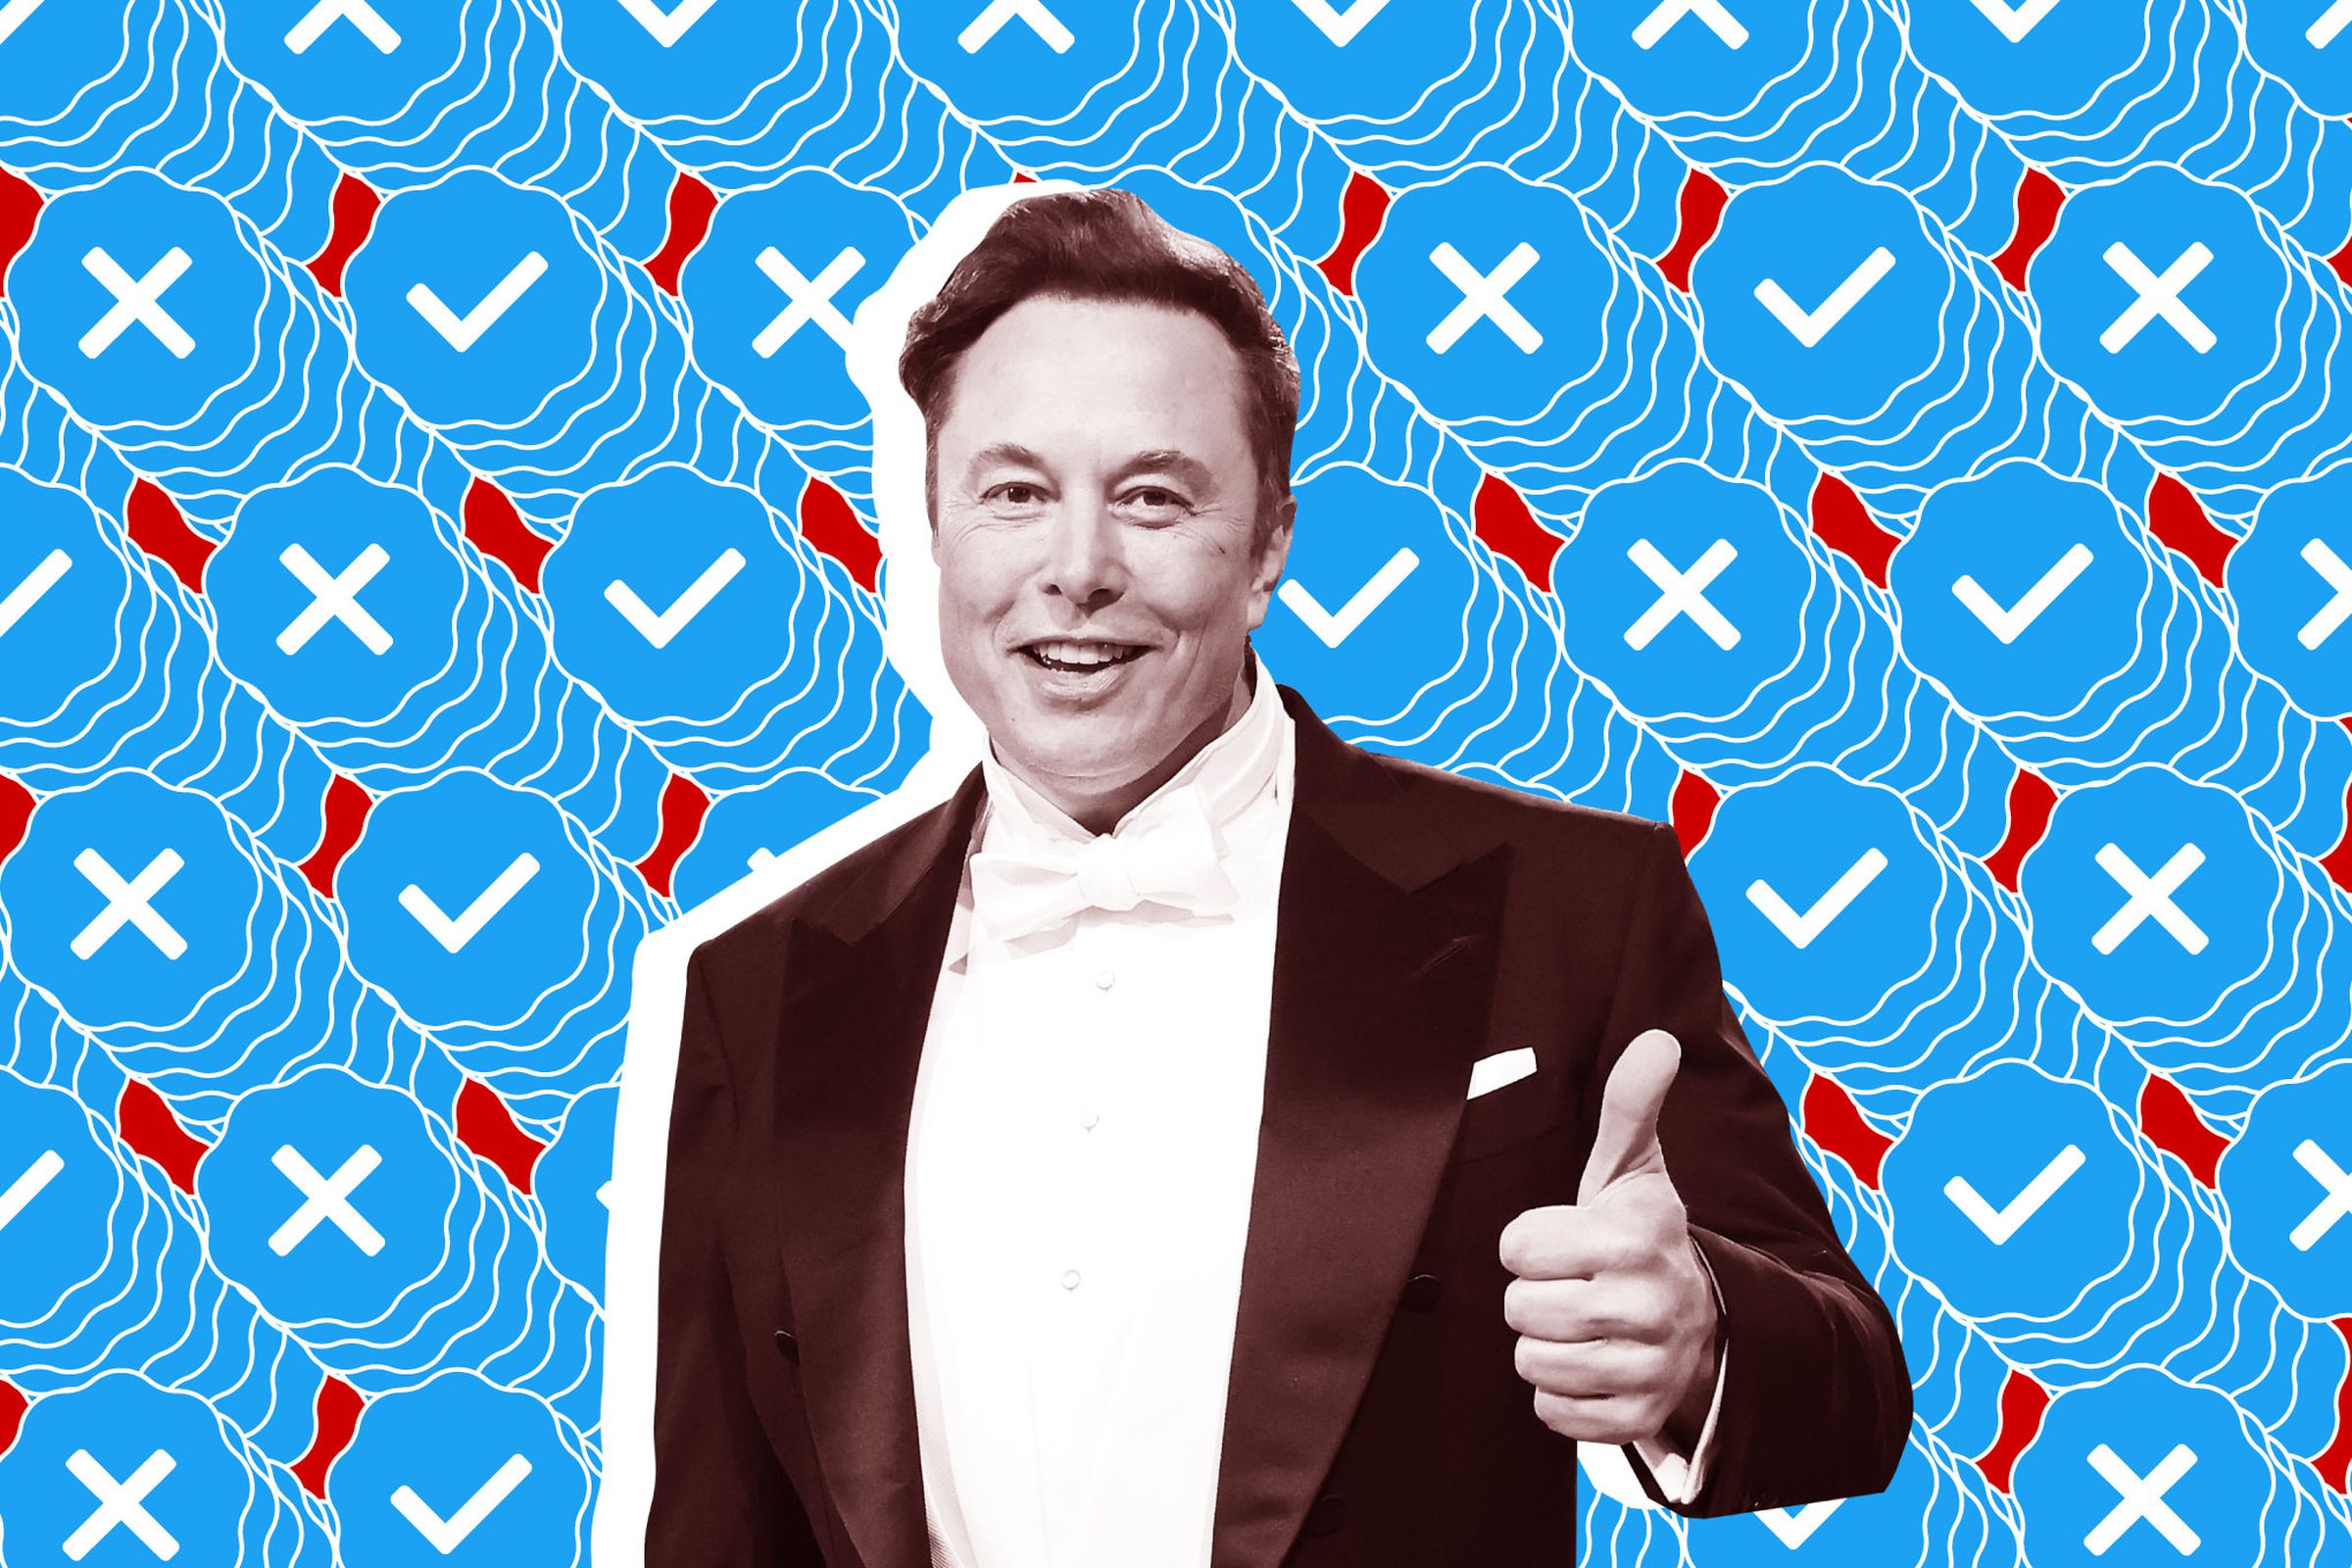 Elon Musk testified it’s ‘easy’ to raise money, so where are his Twitter investors?